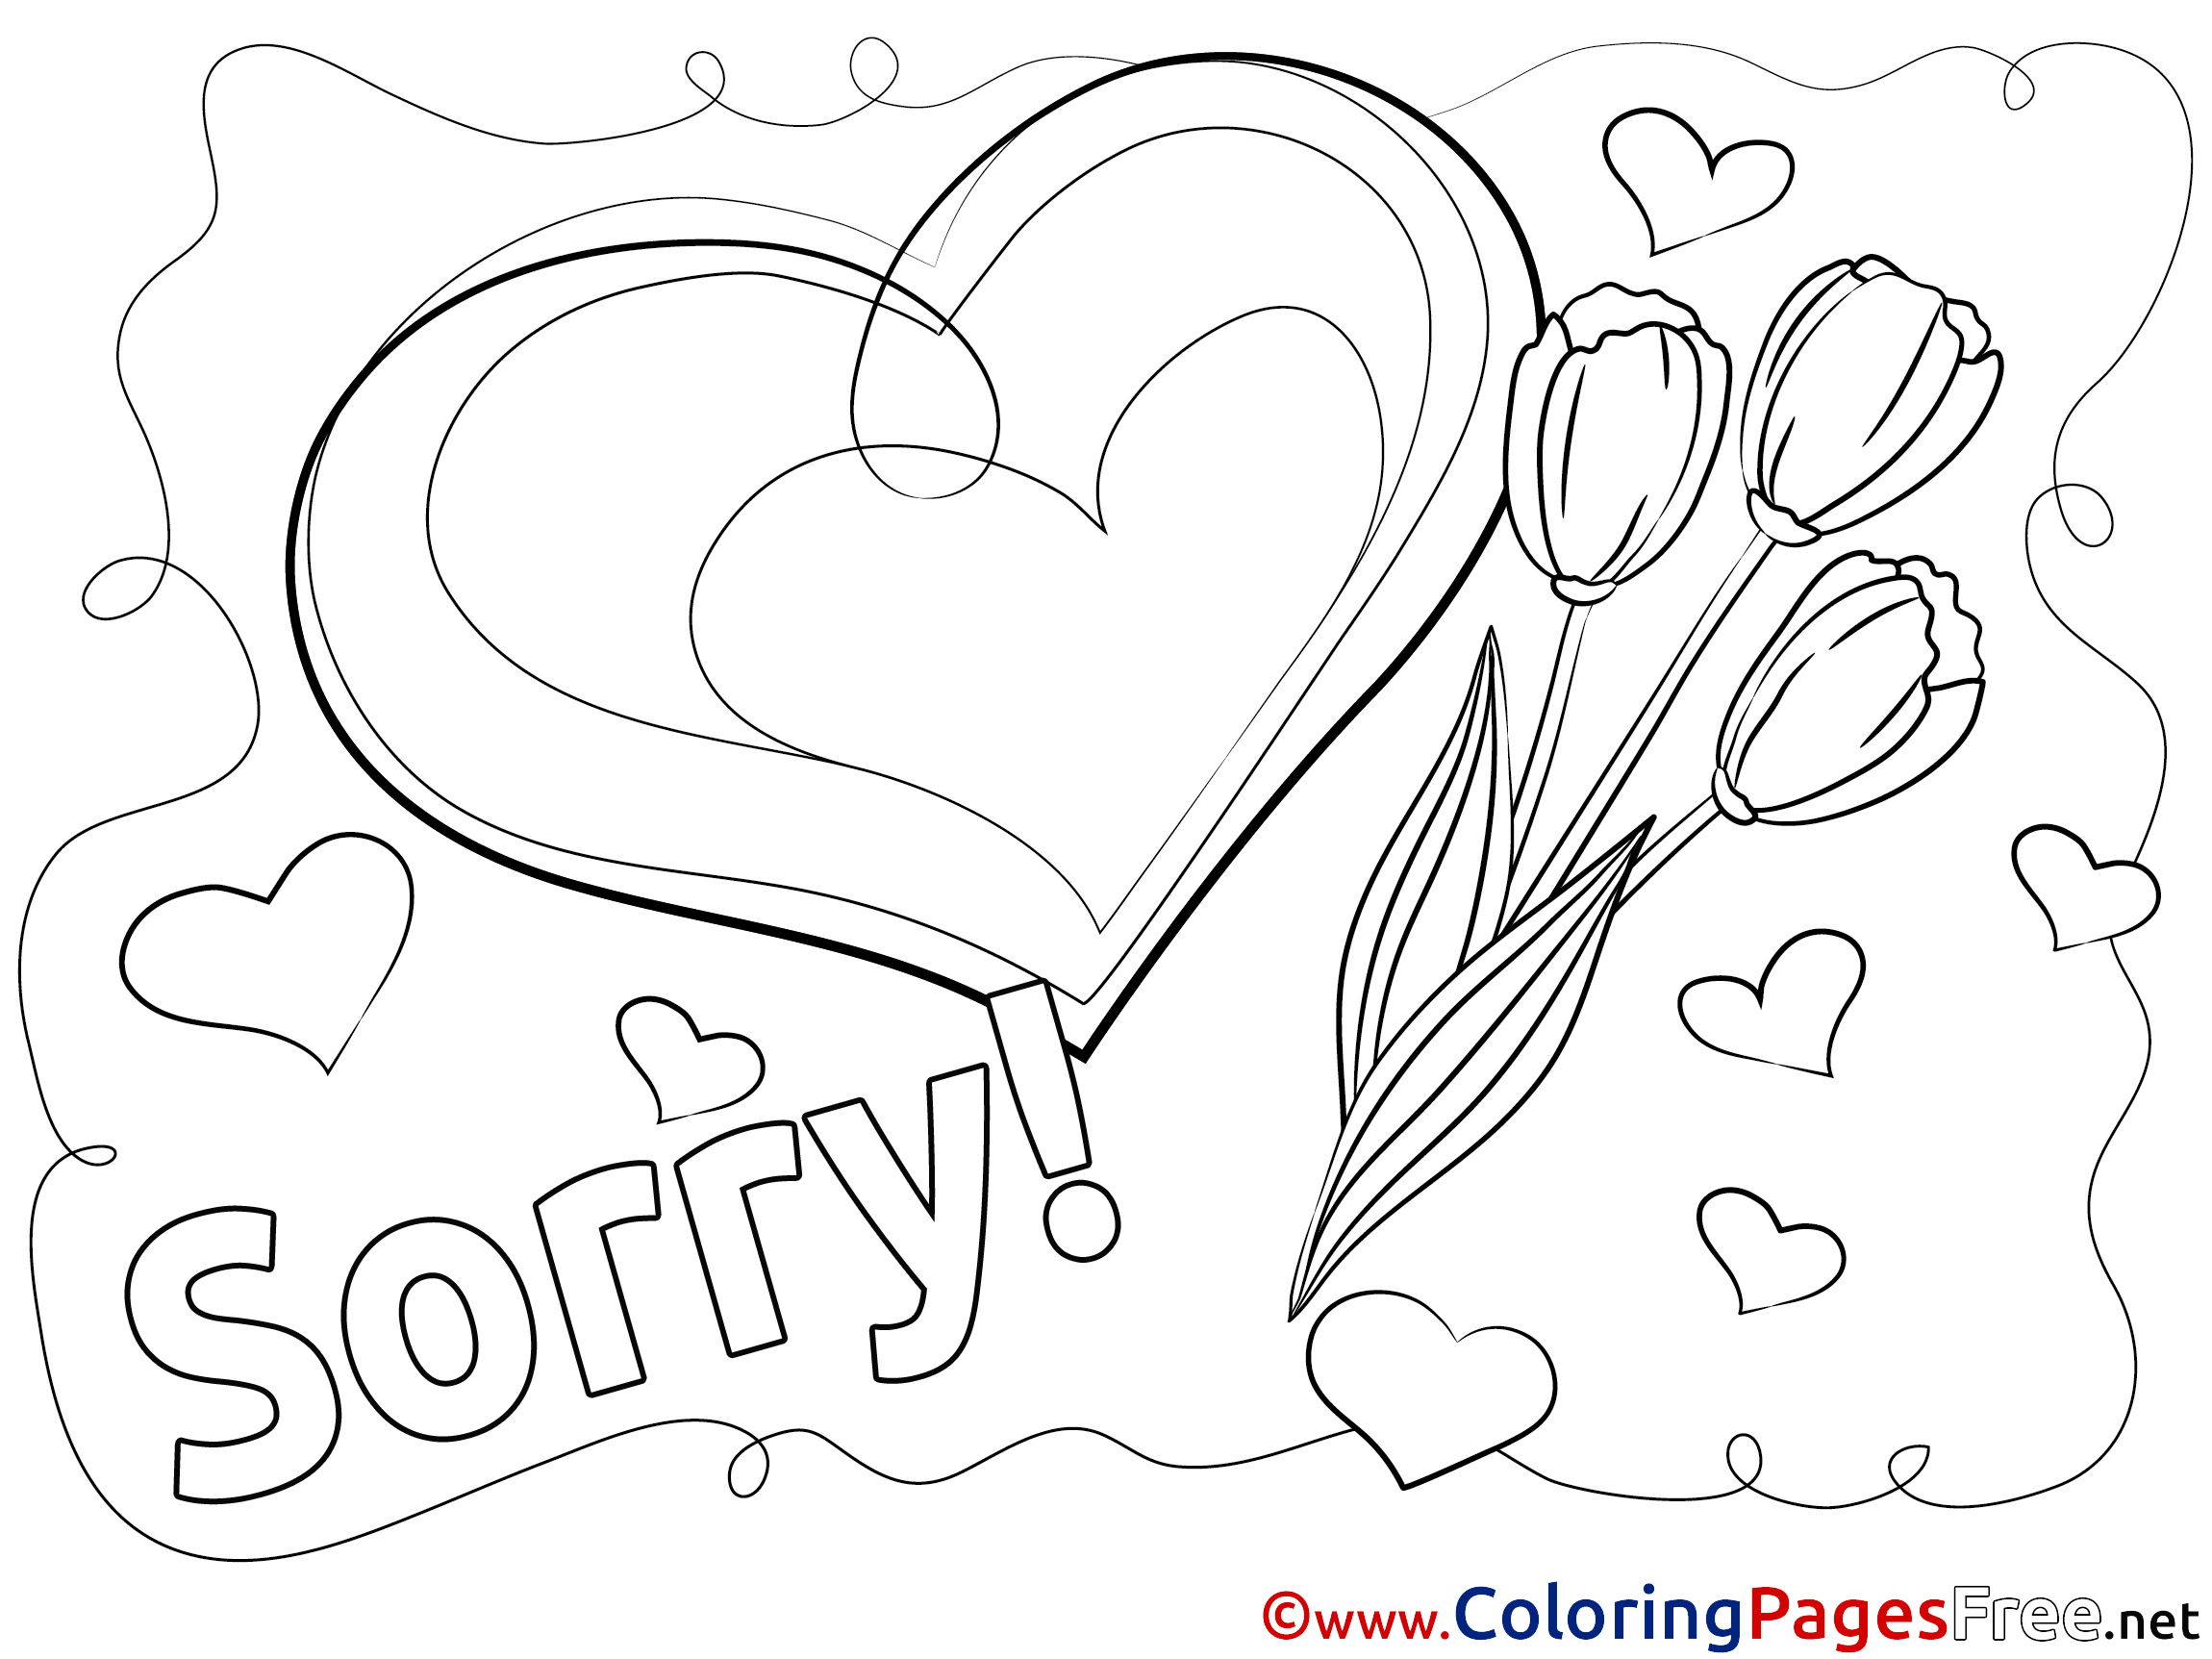 24-i-m-sorry-coloring-page